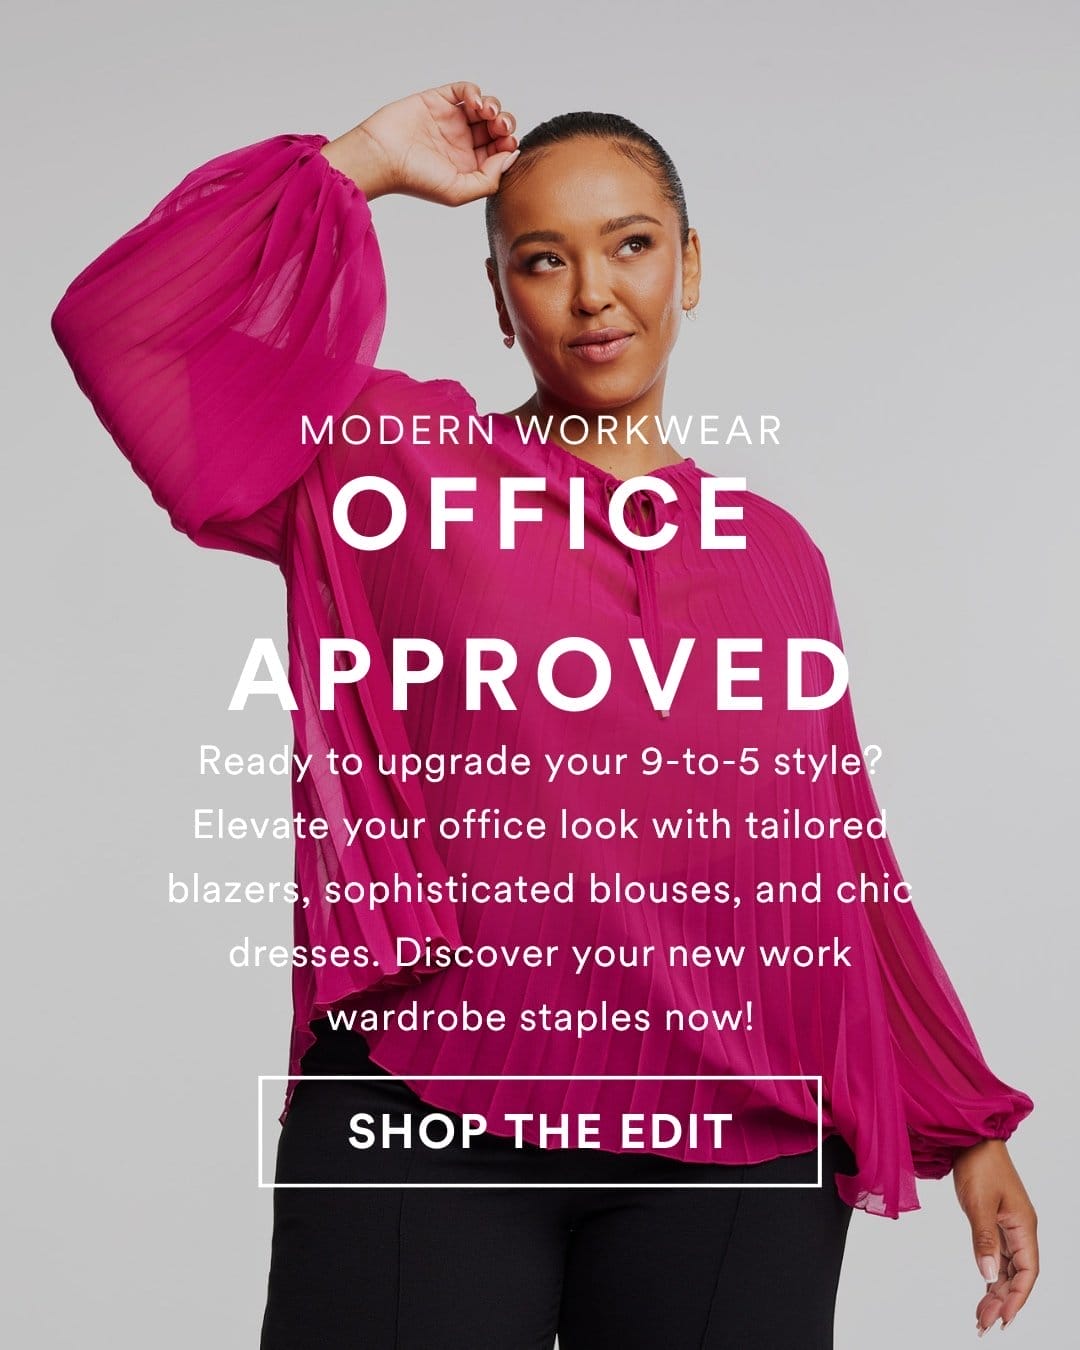 Modern Workwear. Office Approved. Ready to upgrade your 9-to-5 style? Elevate your office look with tailored blazers, sophisticated blouses, and chic dresses. Discover your new work wardrobe staples now!